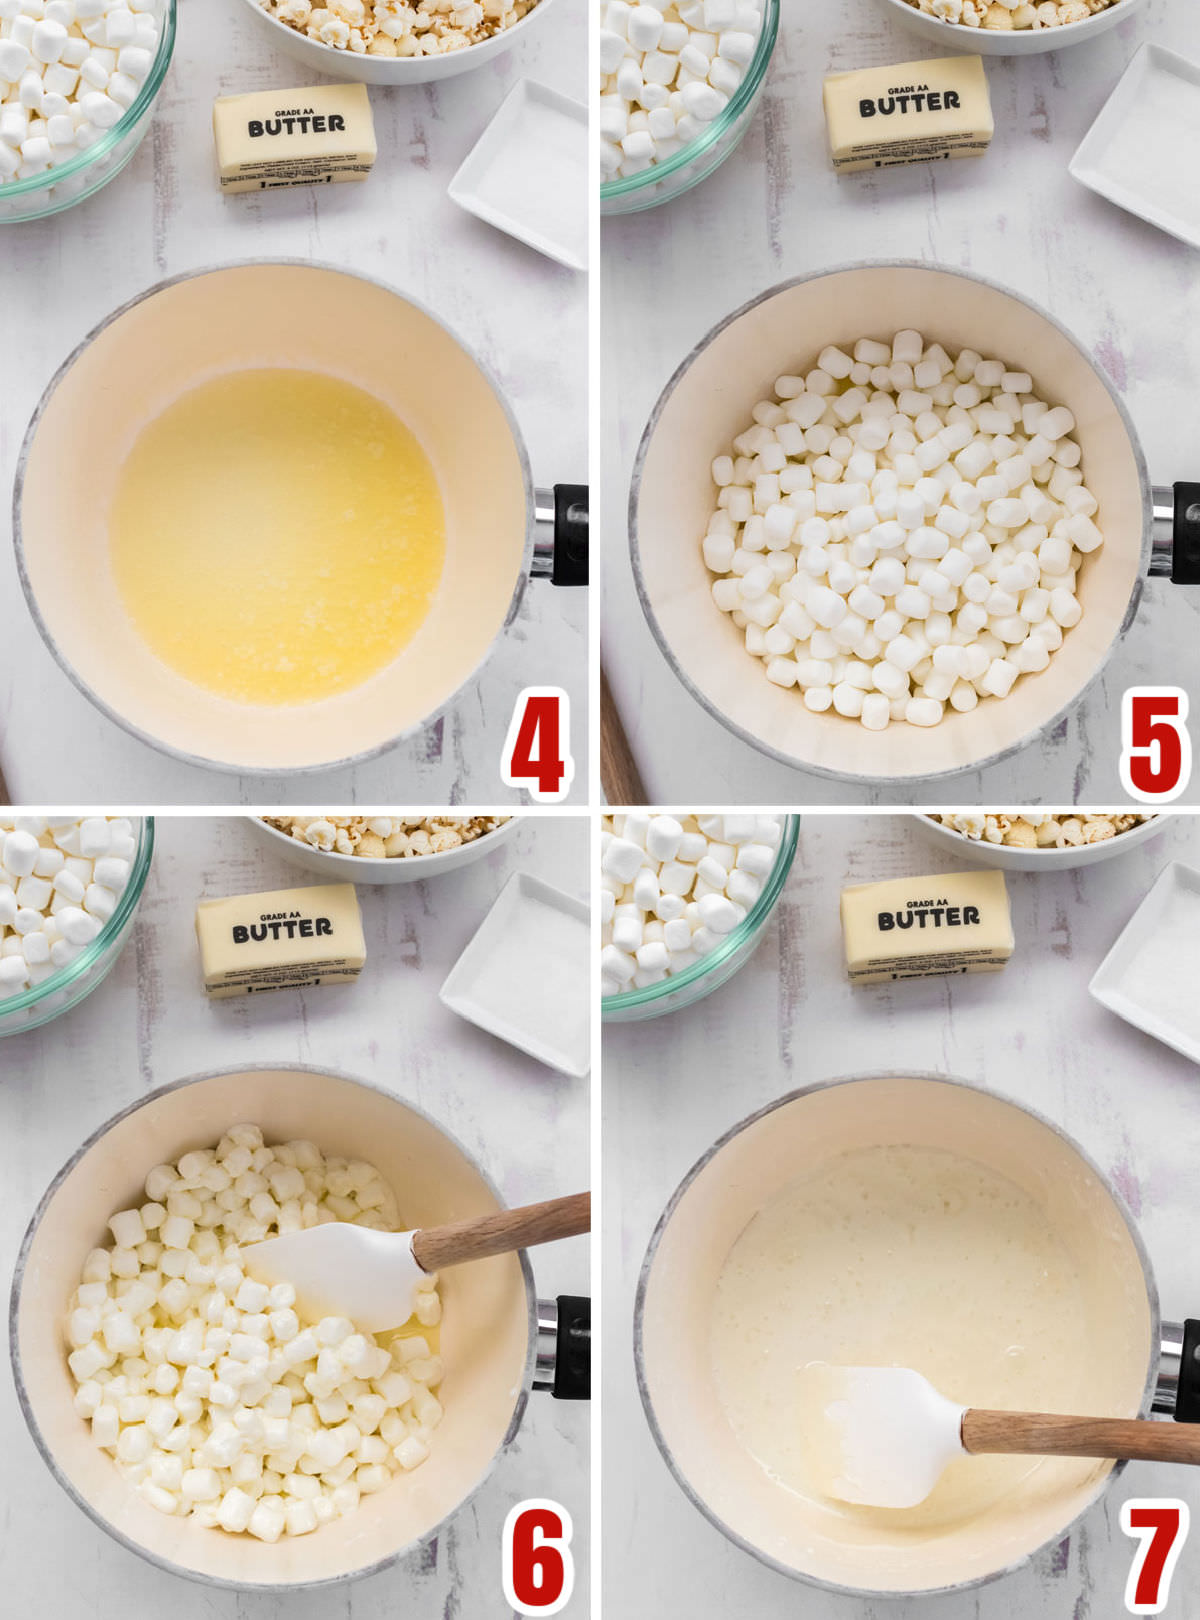 Collage image showing how to make the marshmallow mixture for the popcorn.